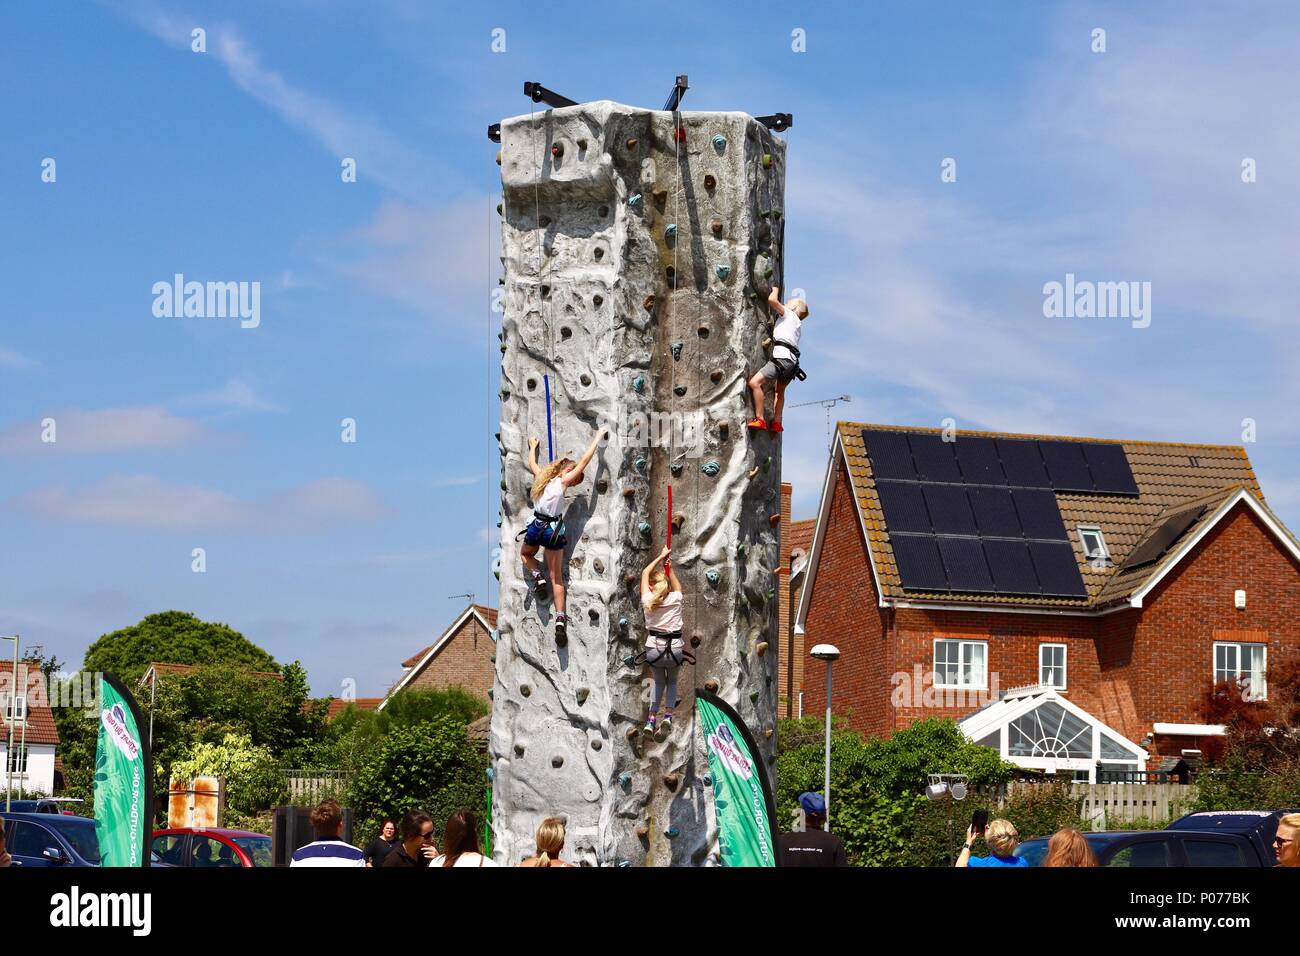 Ipswich, Suffolk, 9 June 2018. UK Weather: Hot bright and sunny for children on the climbing wall at the Kesgrave Family Fun Day. Stock Photo